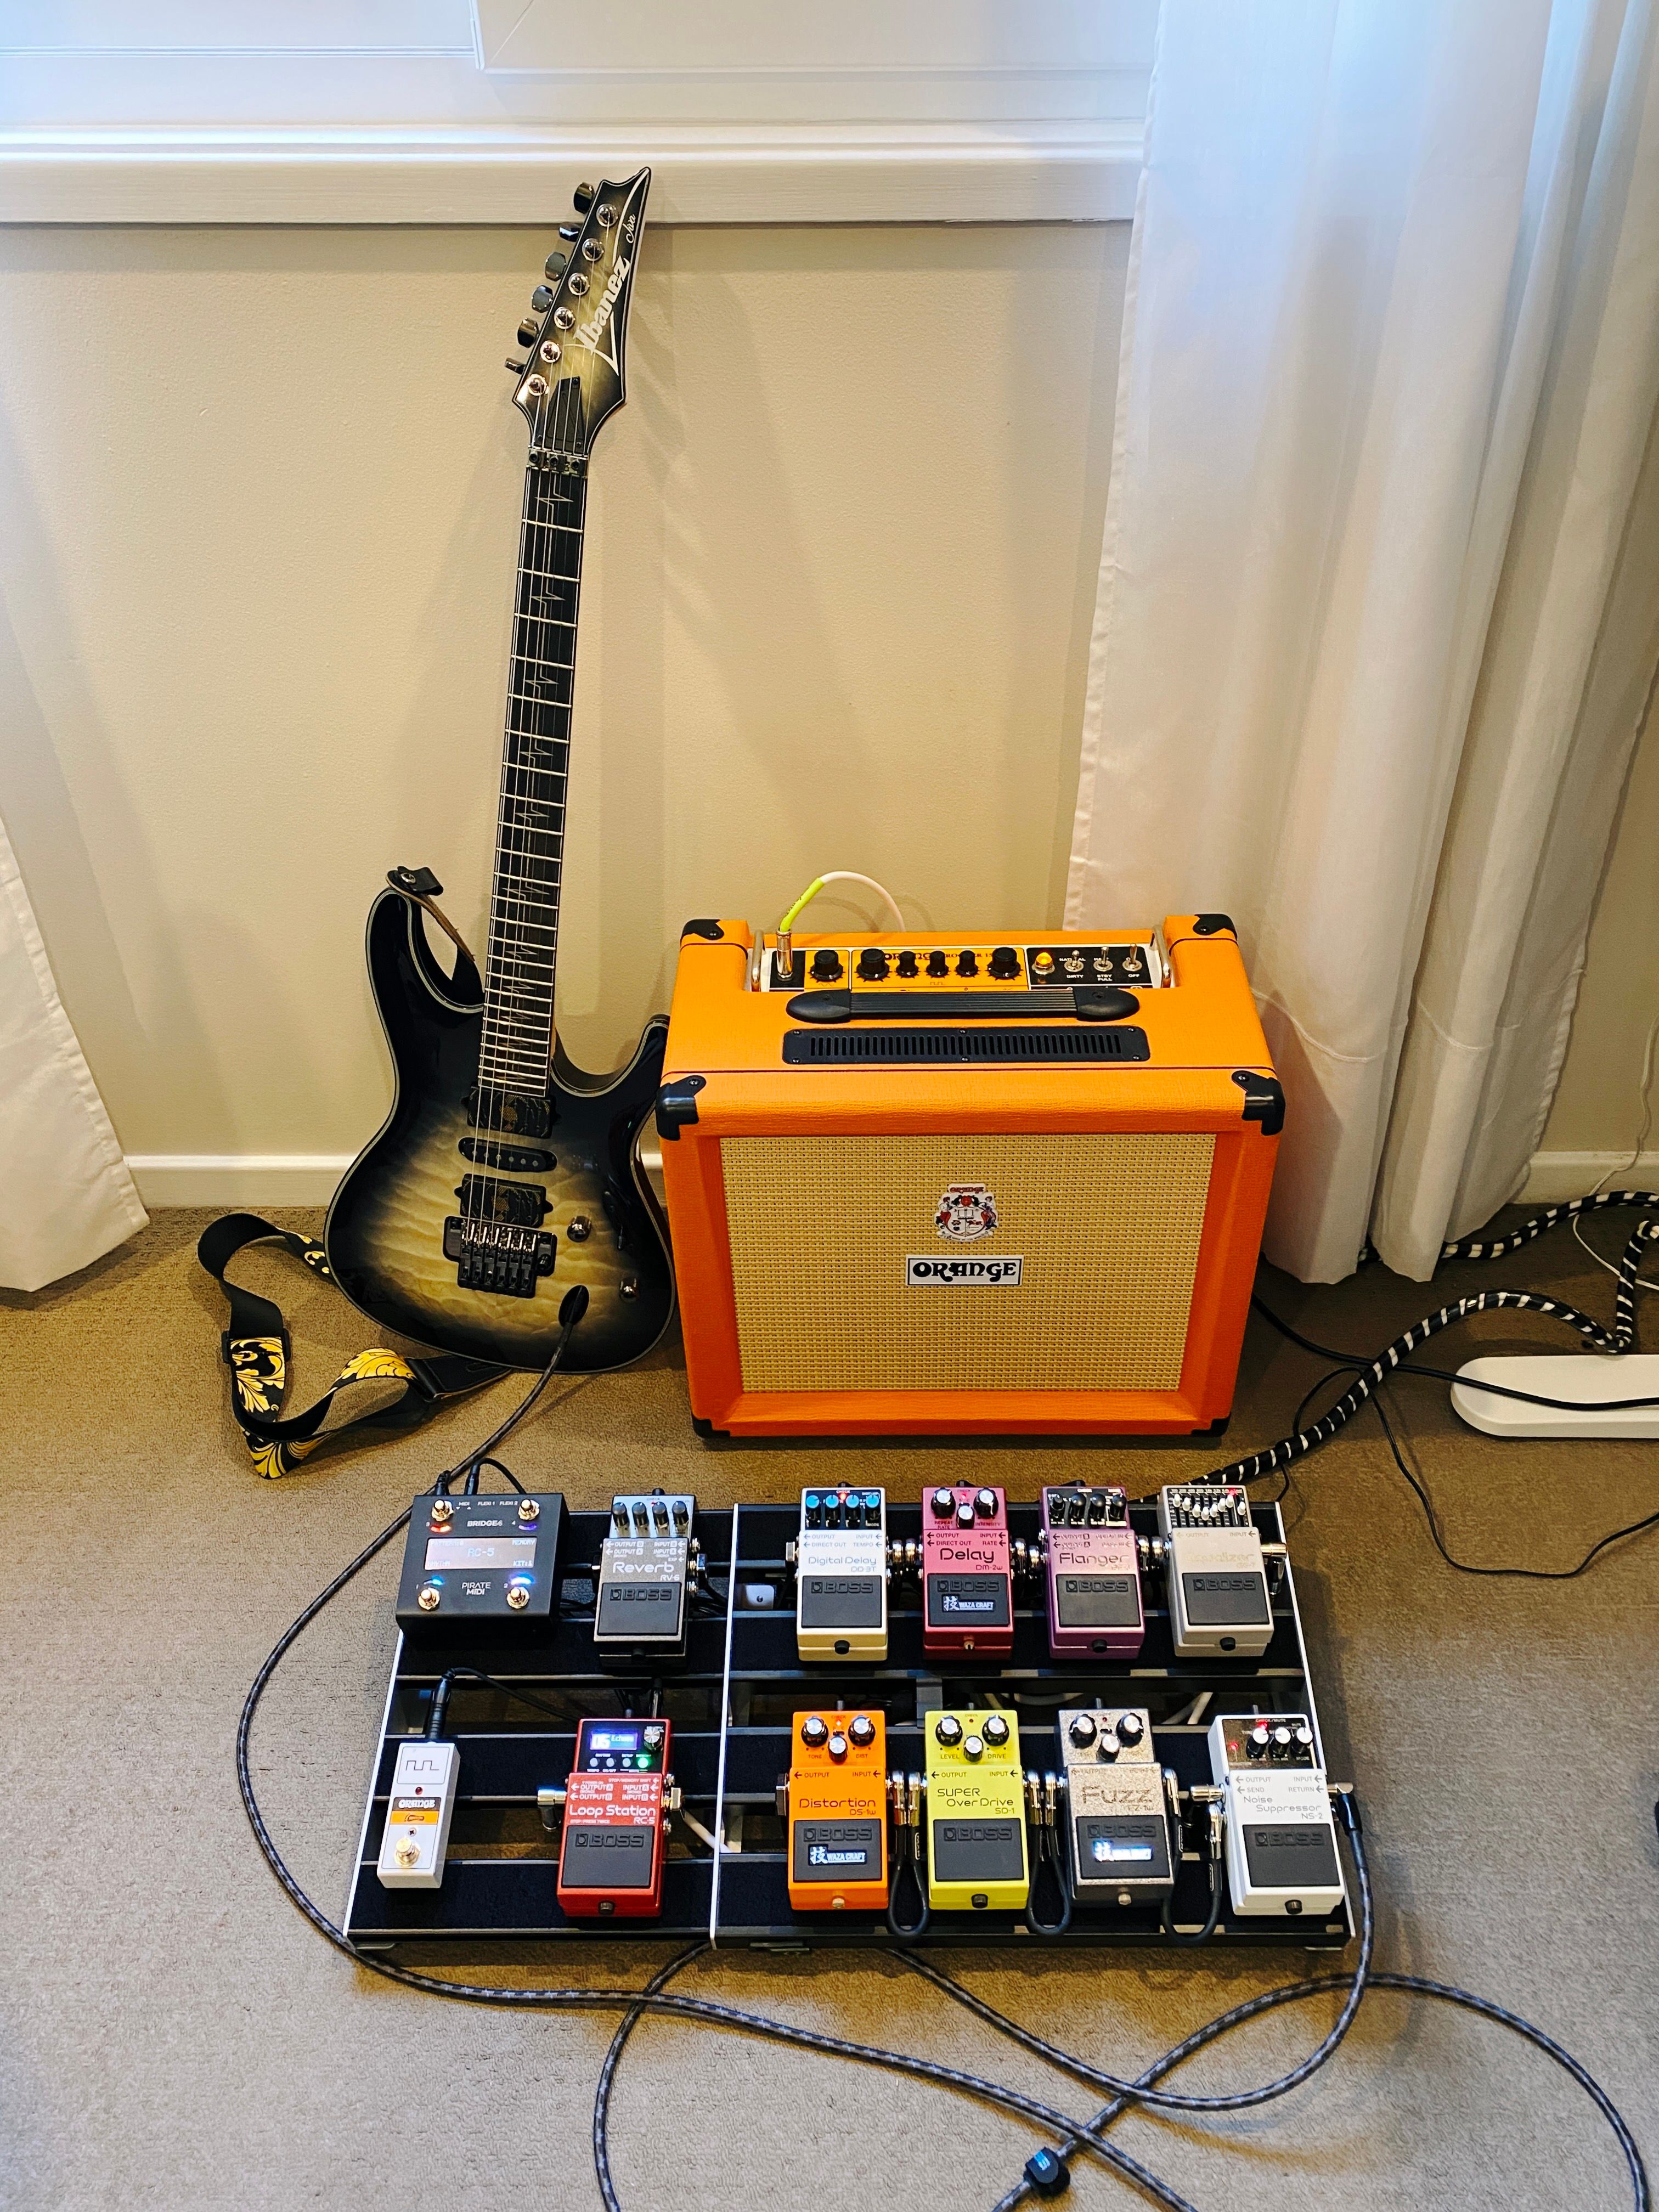 A photo of an Ibanez JIVA10 guitar sitting against a wall next to an Orange amplifier, with a pedal board in front of them with 10 Boss compact pedals on it, plus a MIDI controller pedal and little footswitch pedal for switching the amp between the clean and dirty channels.